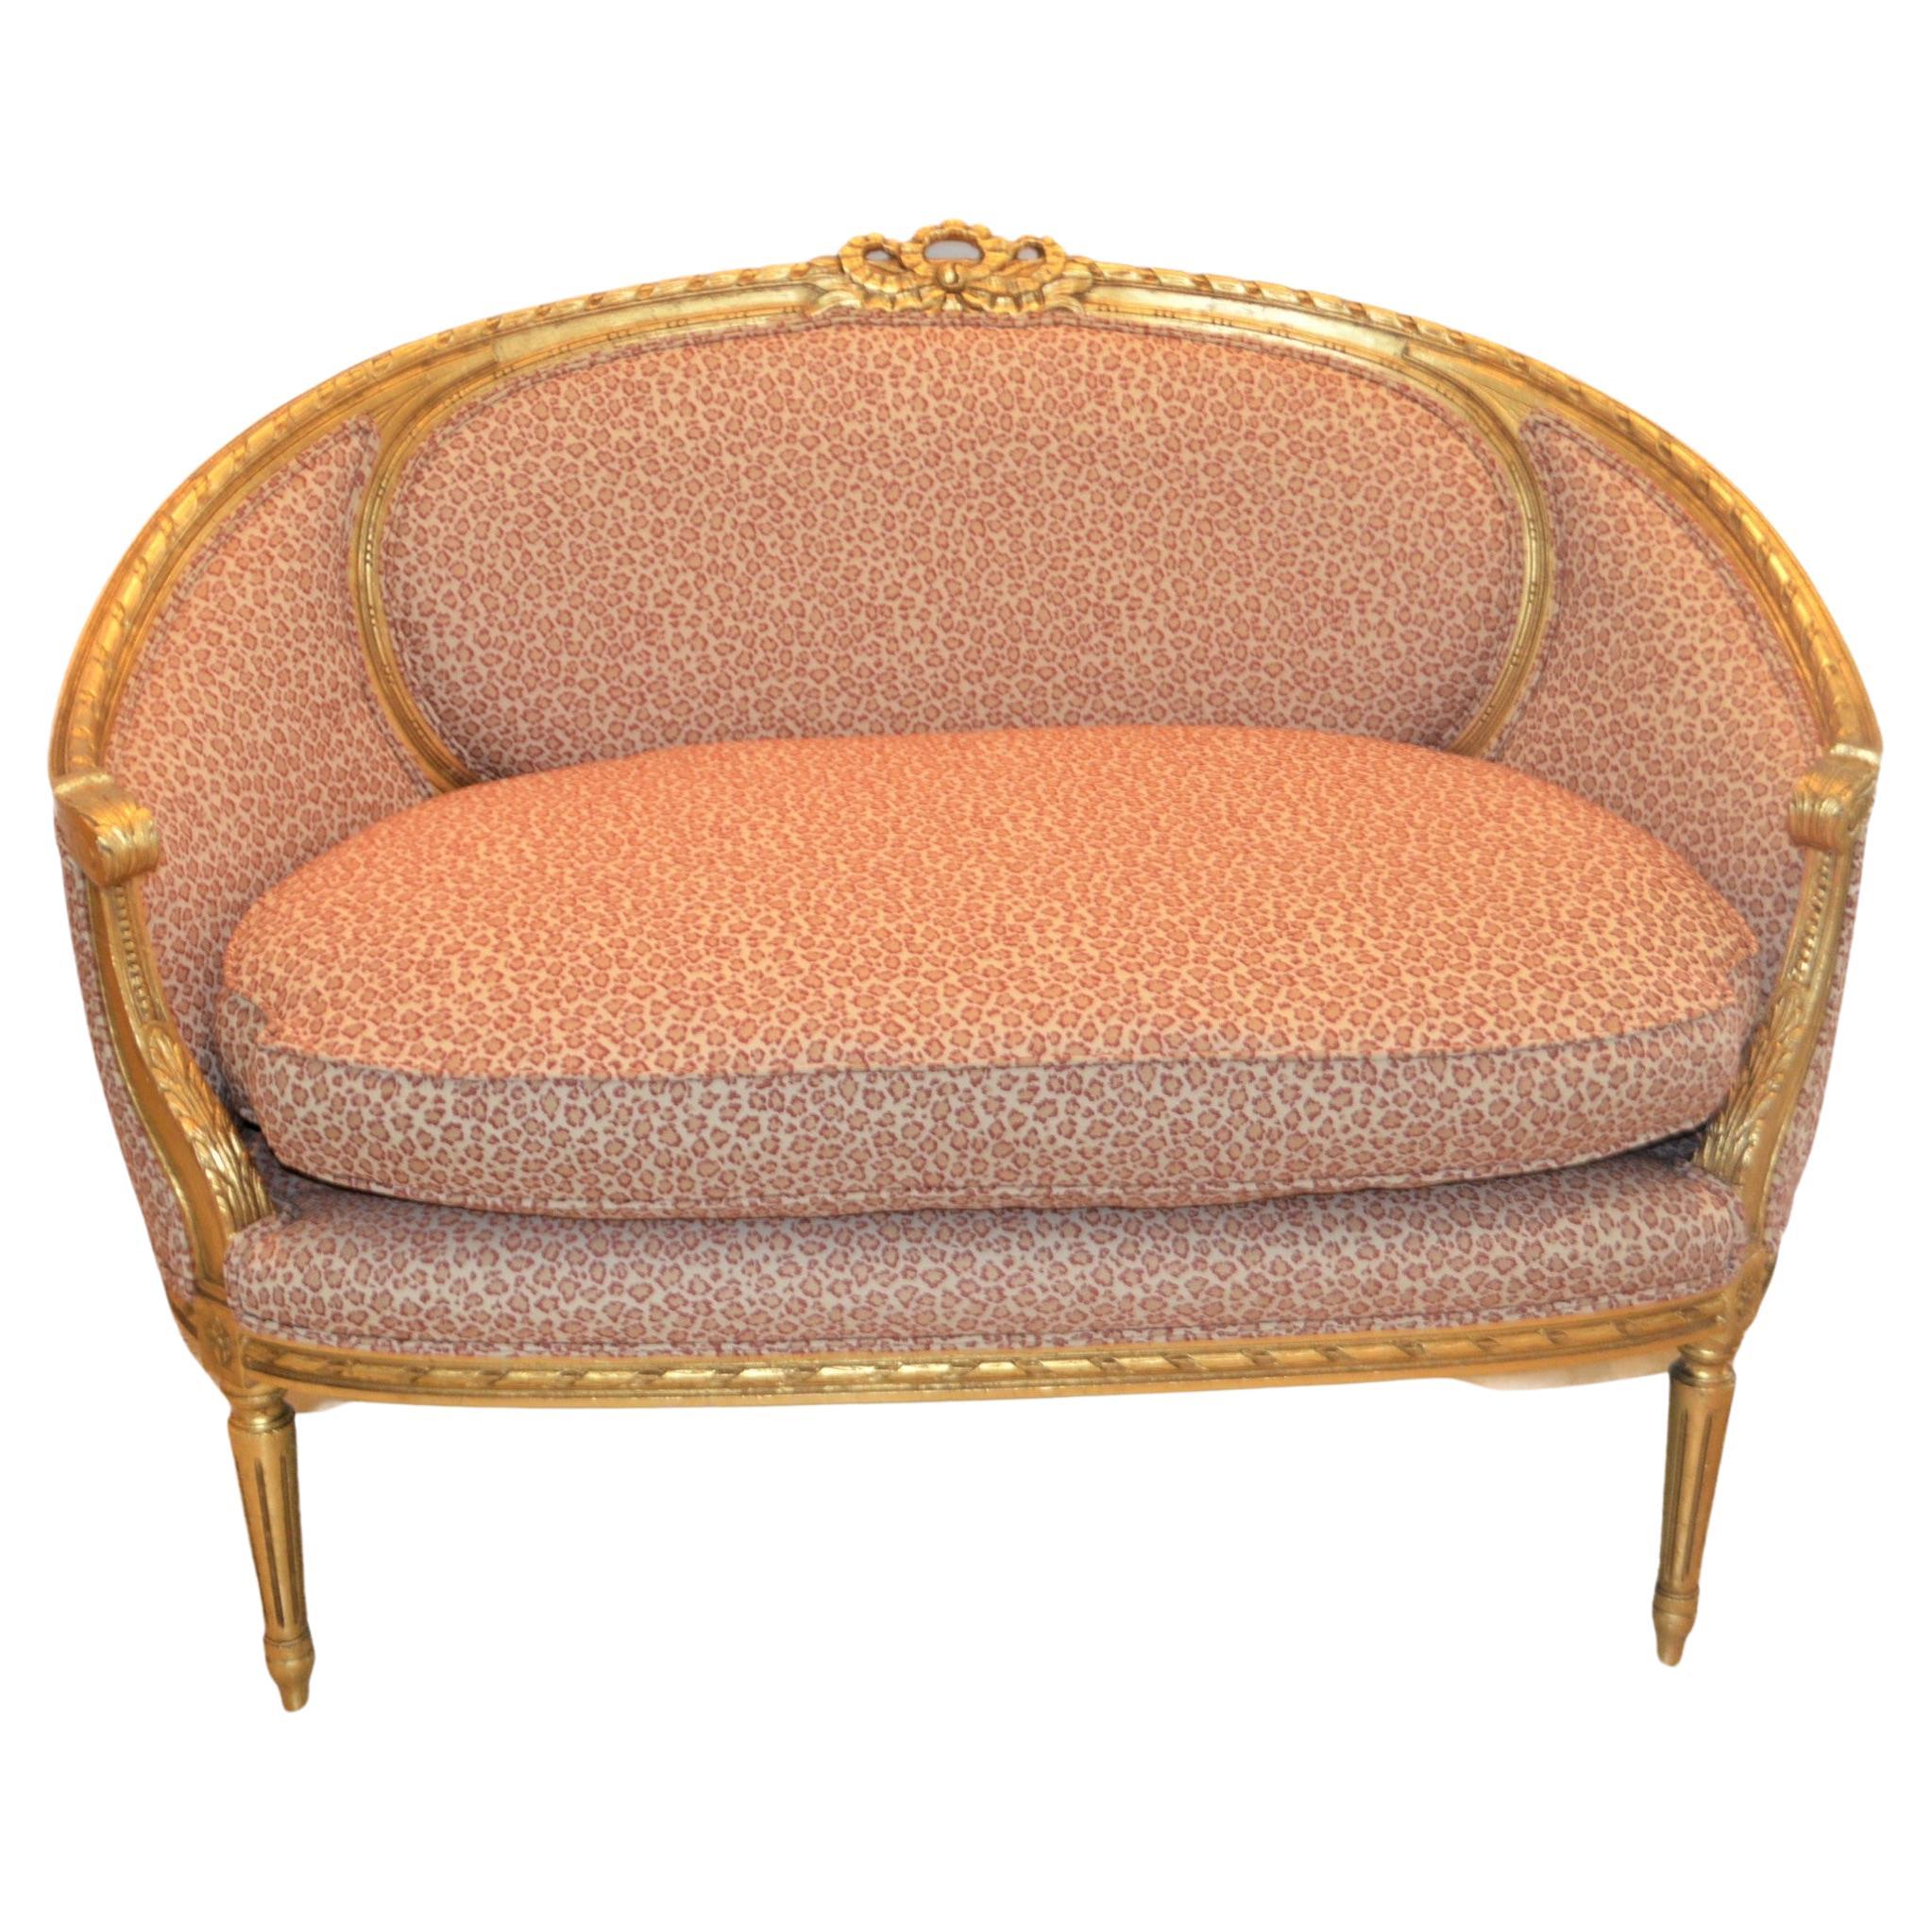 Louis XVI style gilded settee with pink and cream fabric.